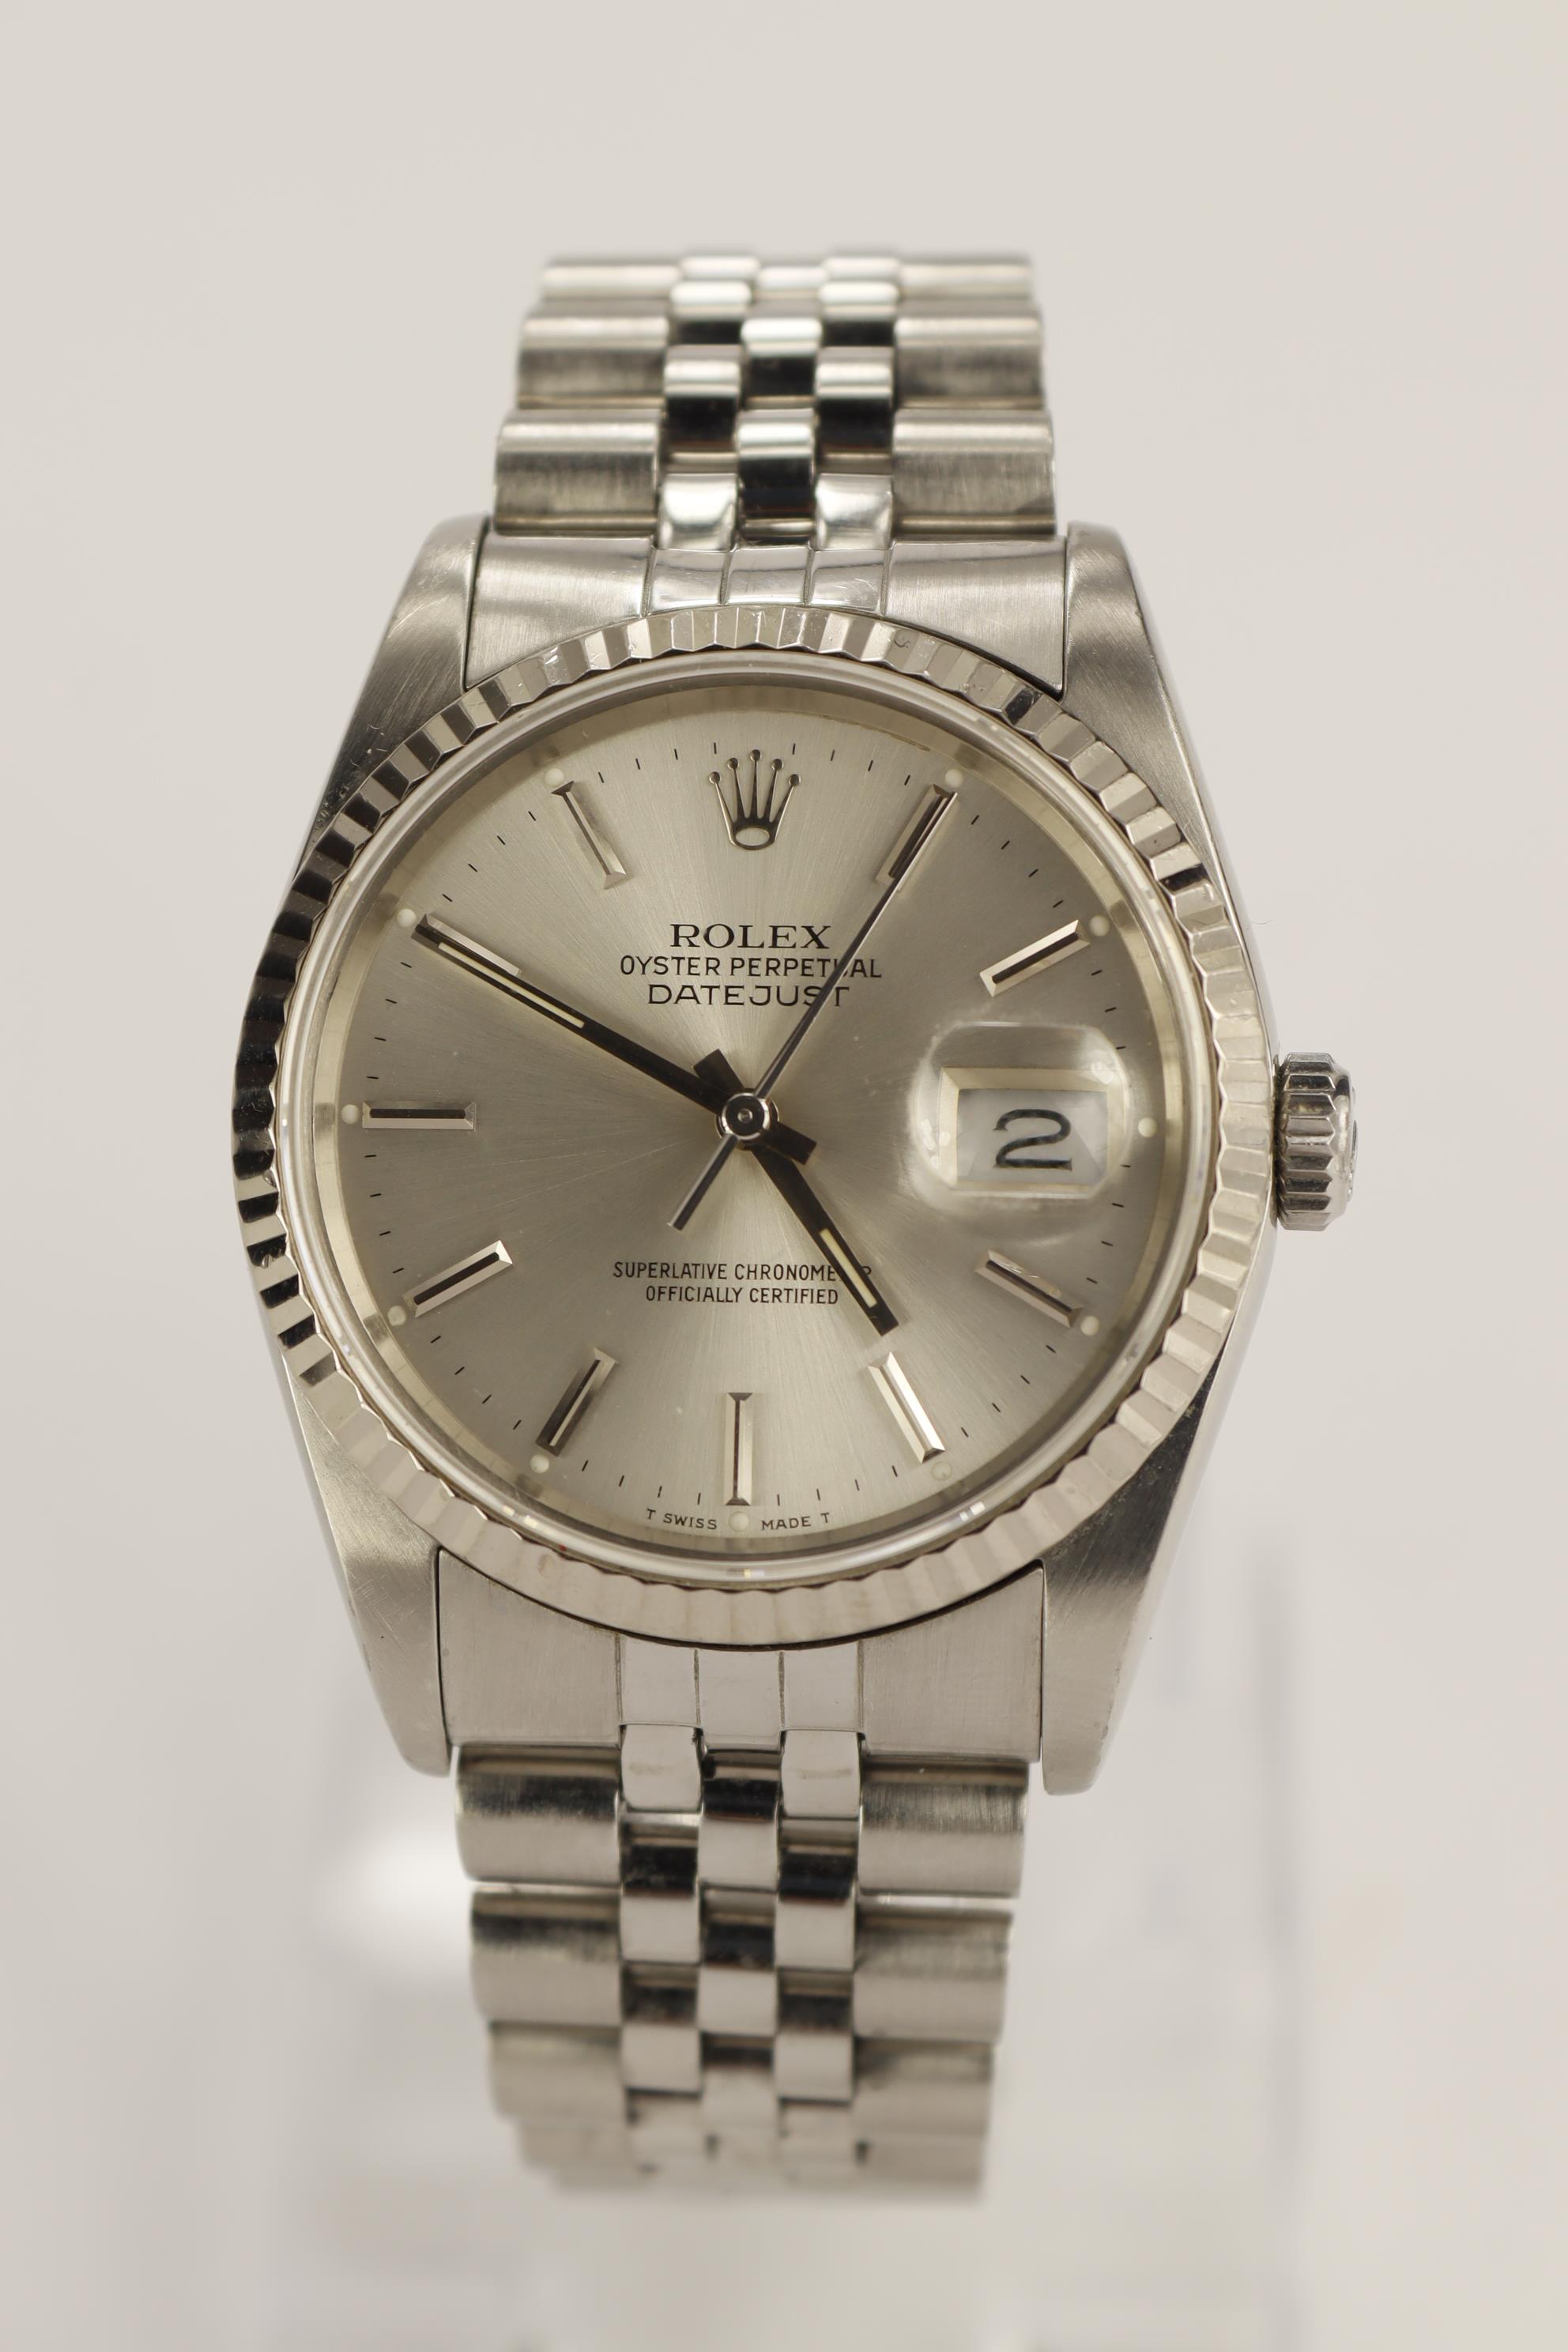 Gents Stainless steel cased Rolex Oyster Datejust wristwatch. Ref 16234. Circa 1990/91. On a - Image 2 of 3